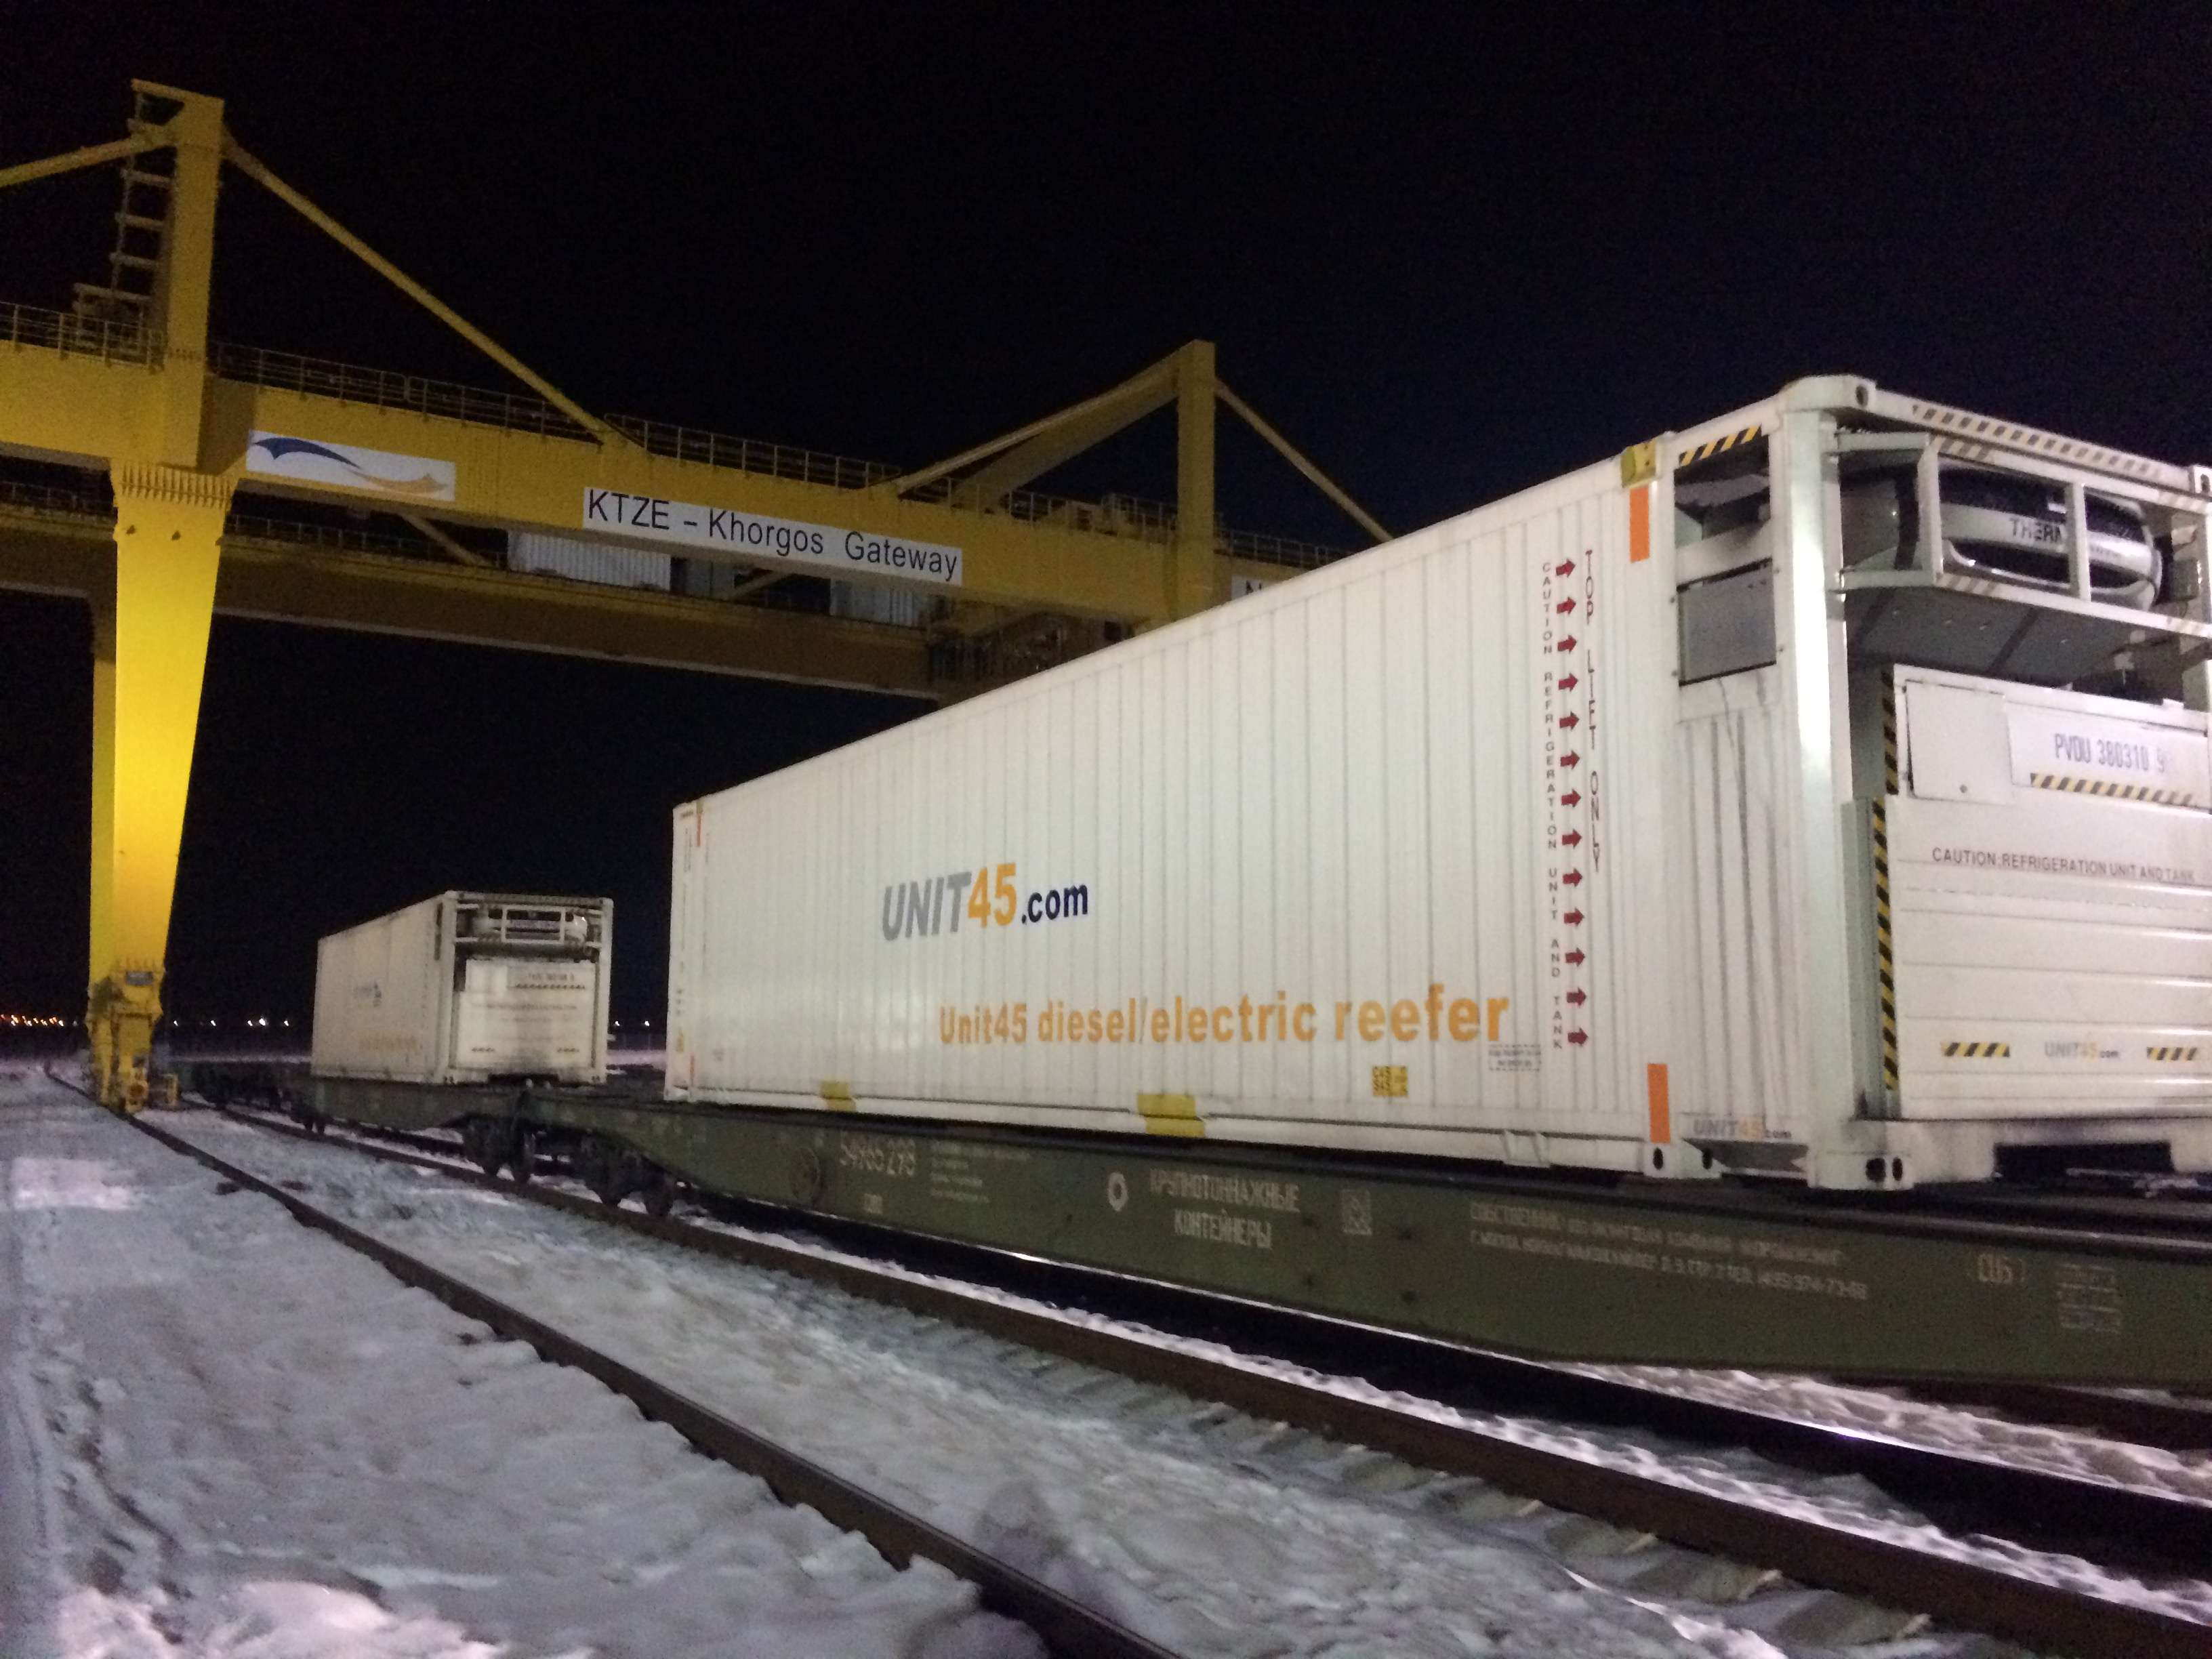 Independently fuelled, climate-controlled Unit45 Smart containers roll into Khorgos Gateway, on Kazakhstan’s border with China.